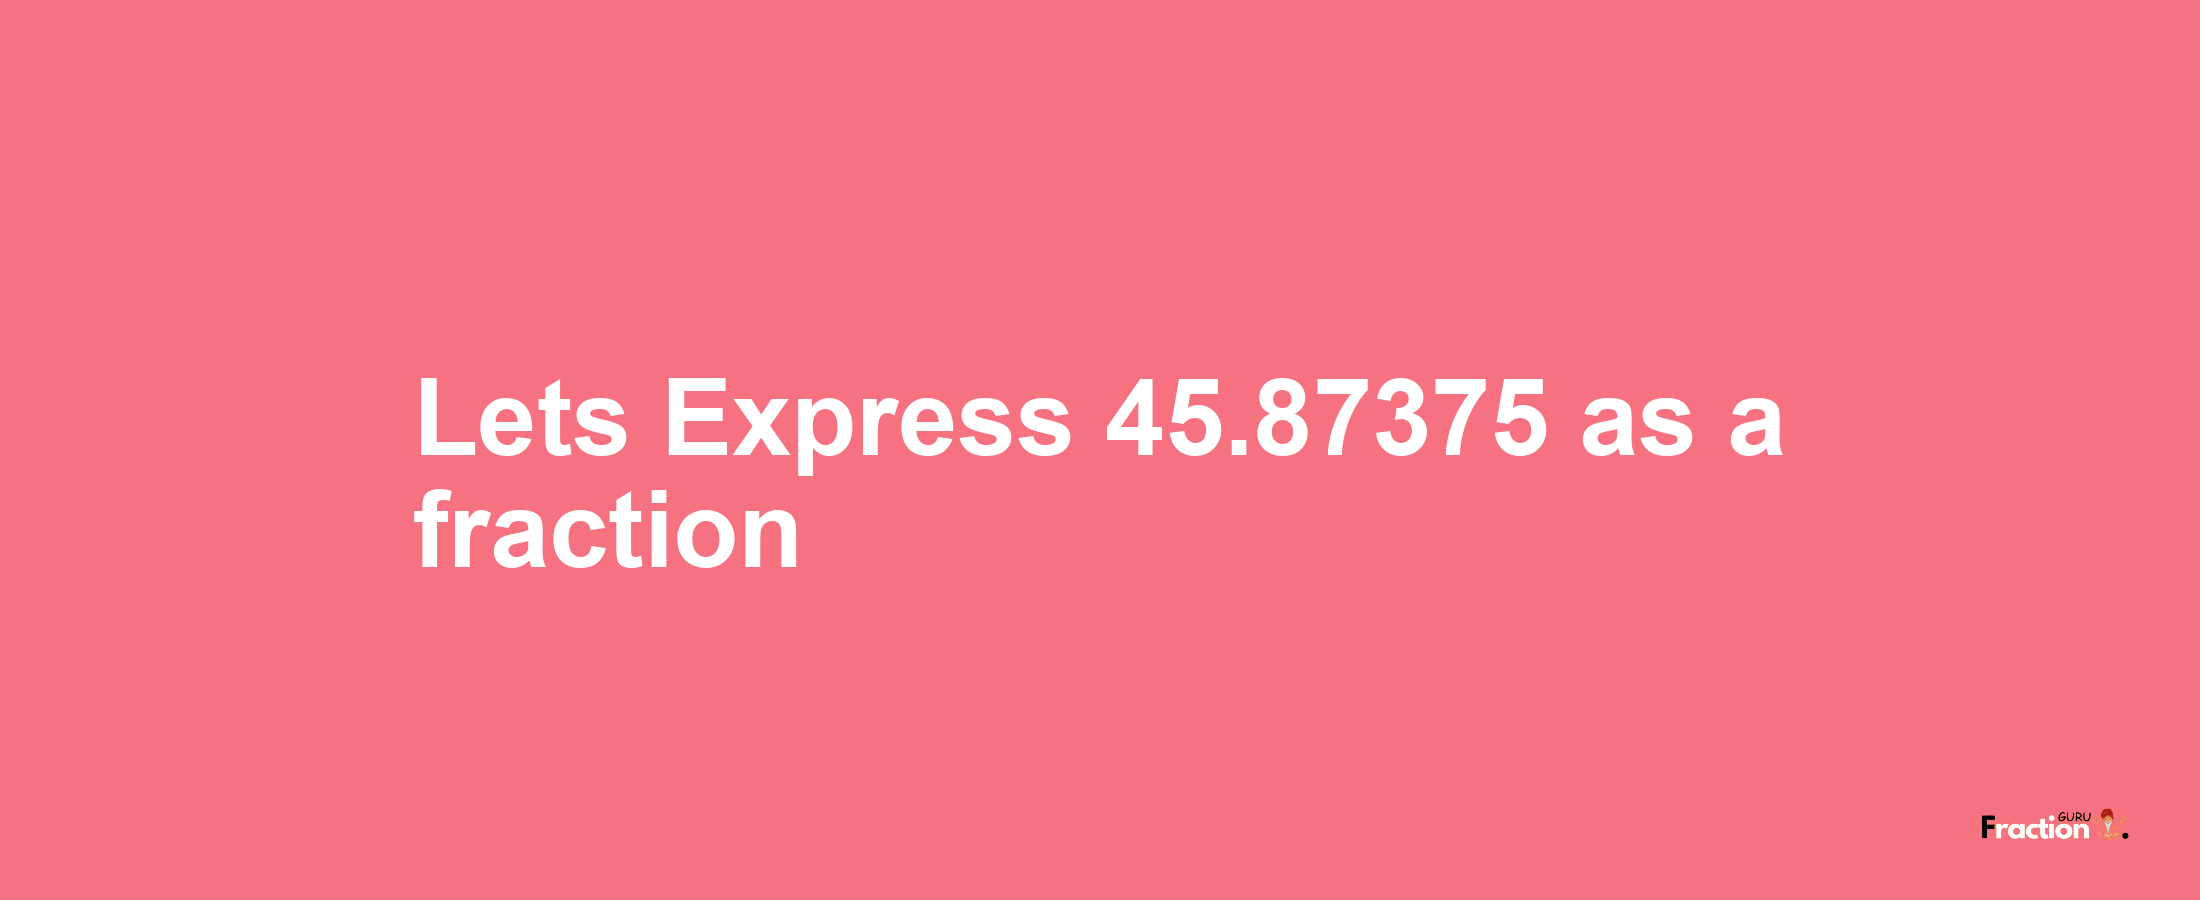 Lets Express 45.87375 as afraction